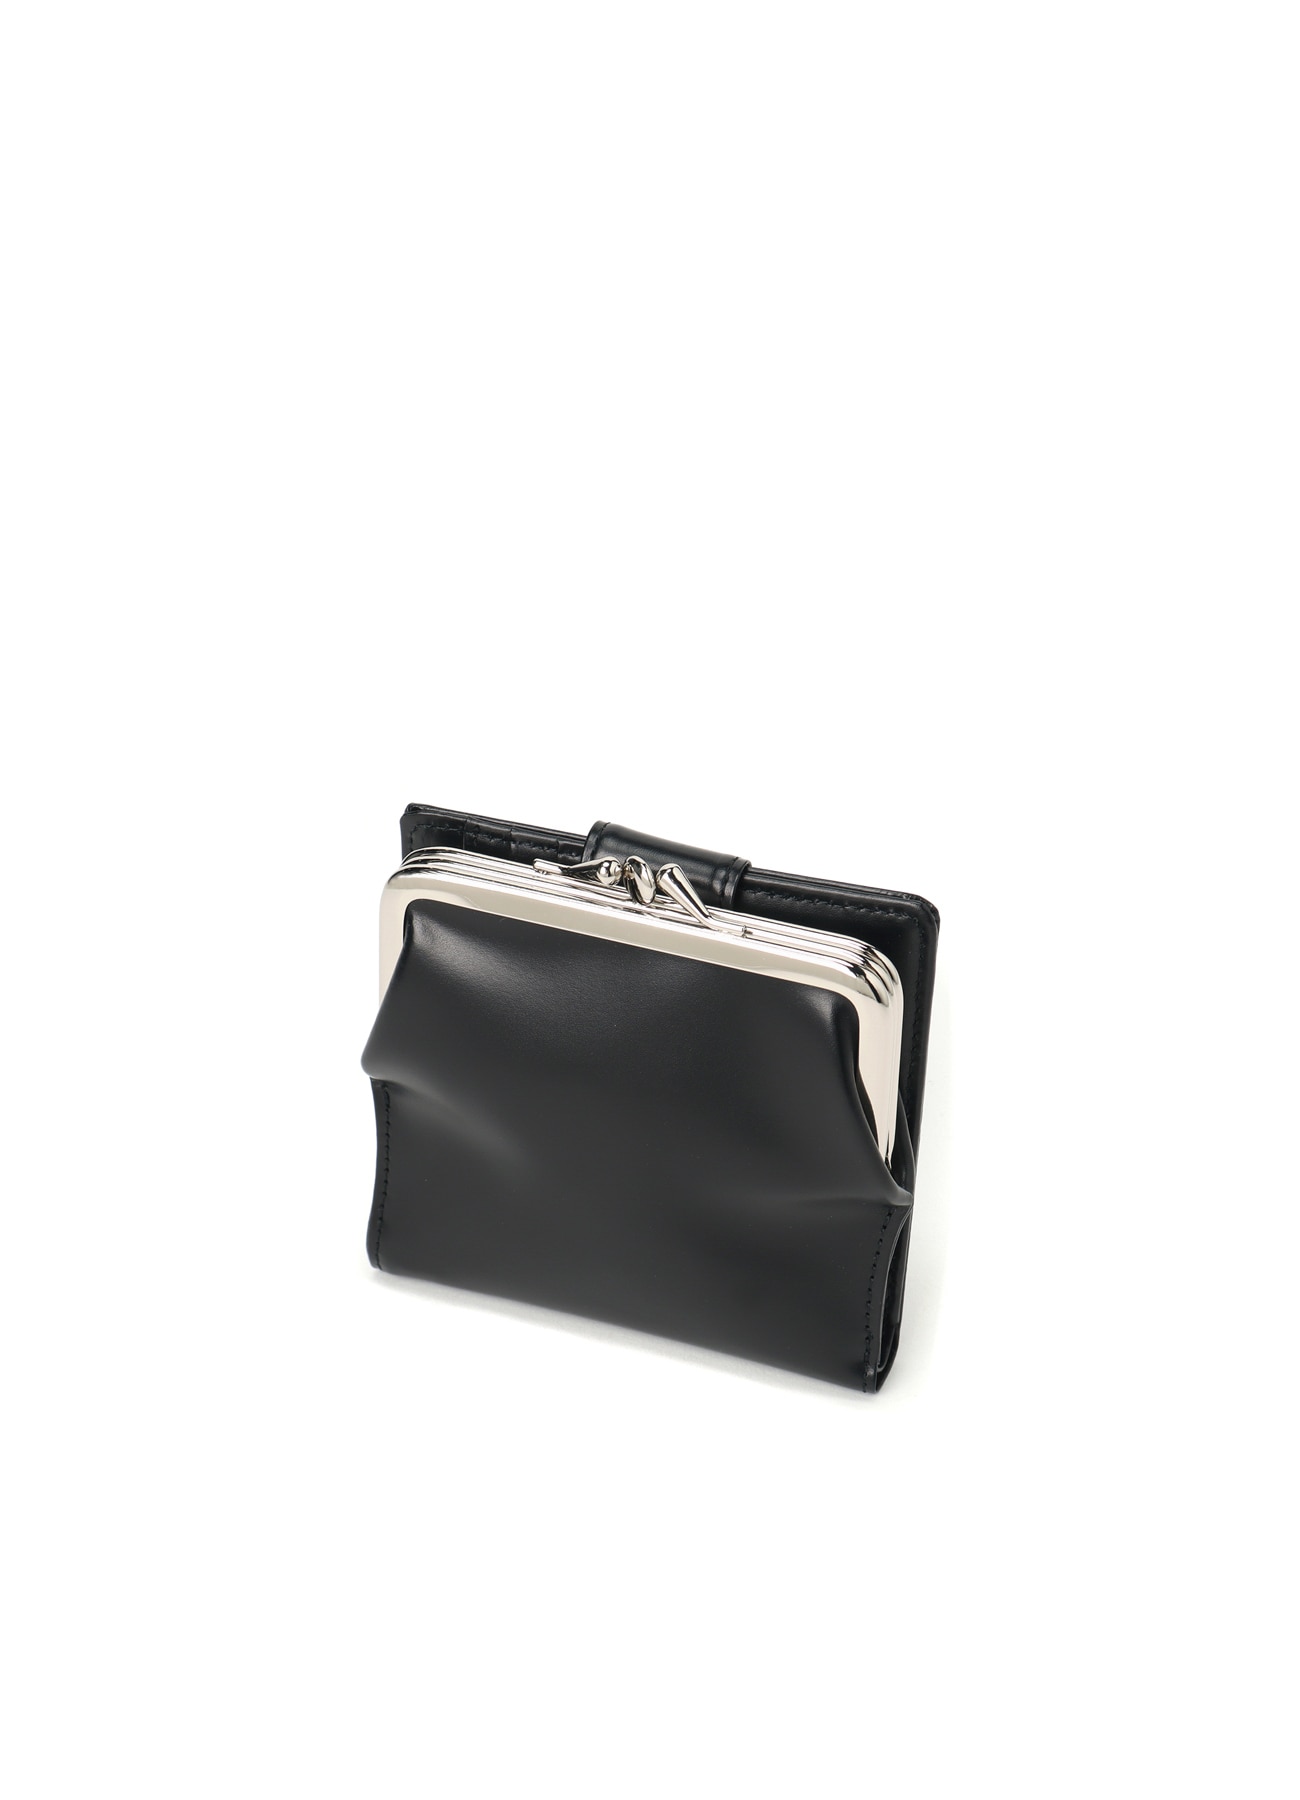 HIGH-GLOSS LEATHER CLASP PURSE